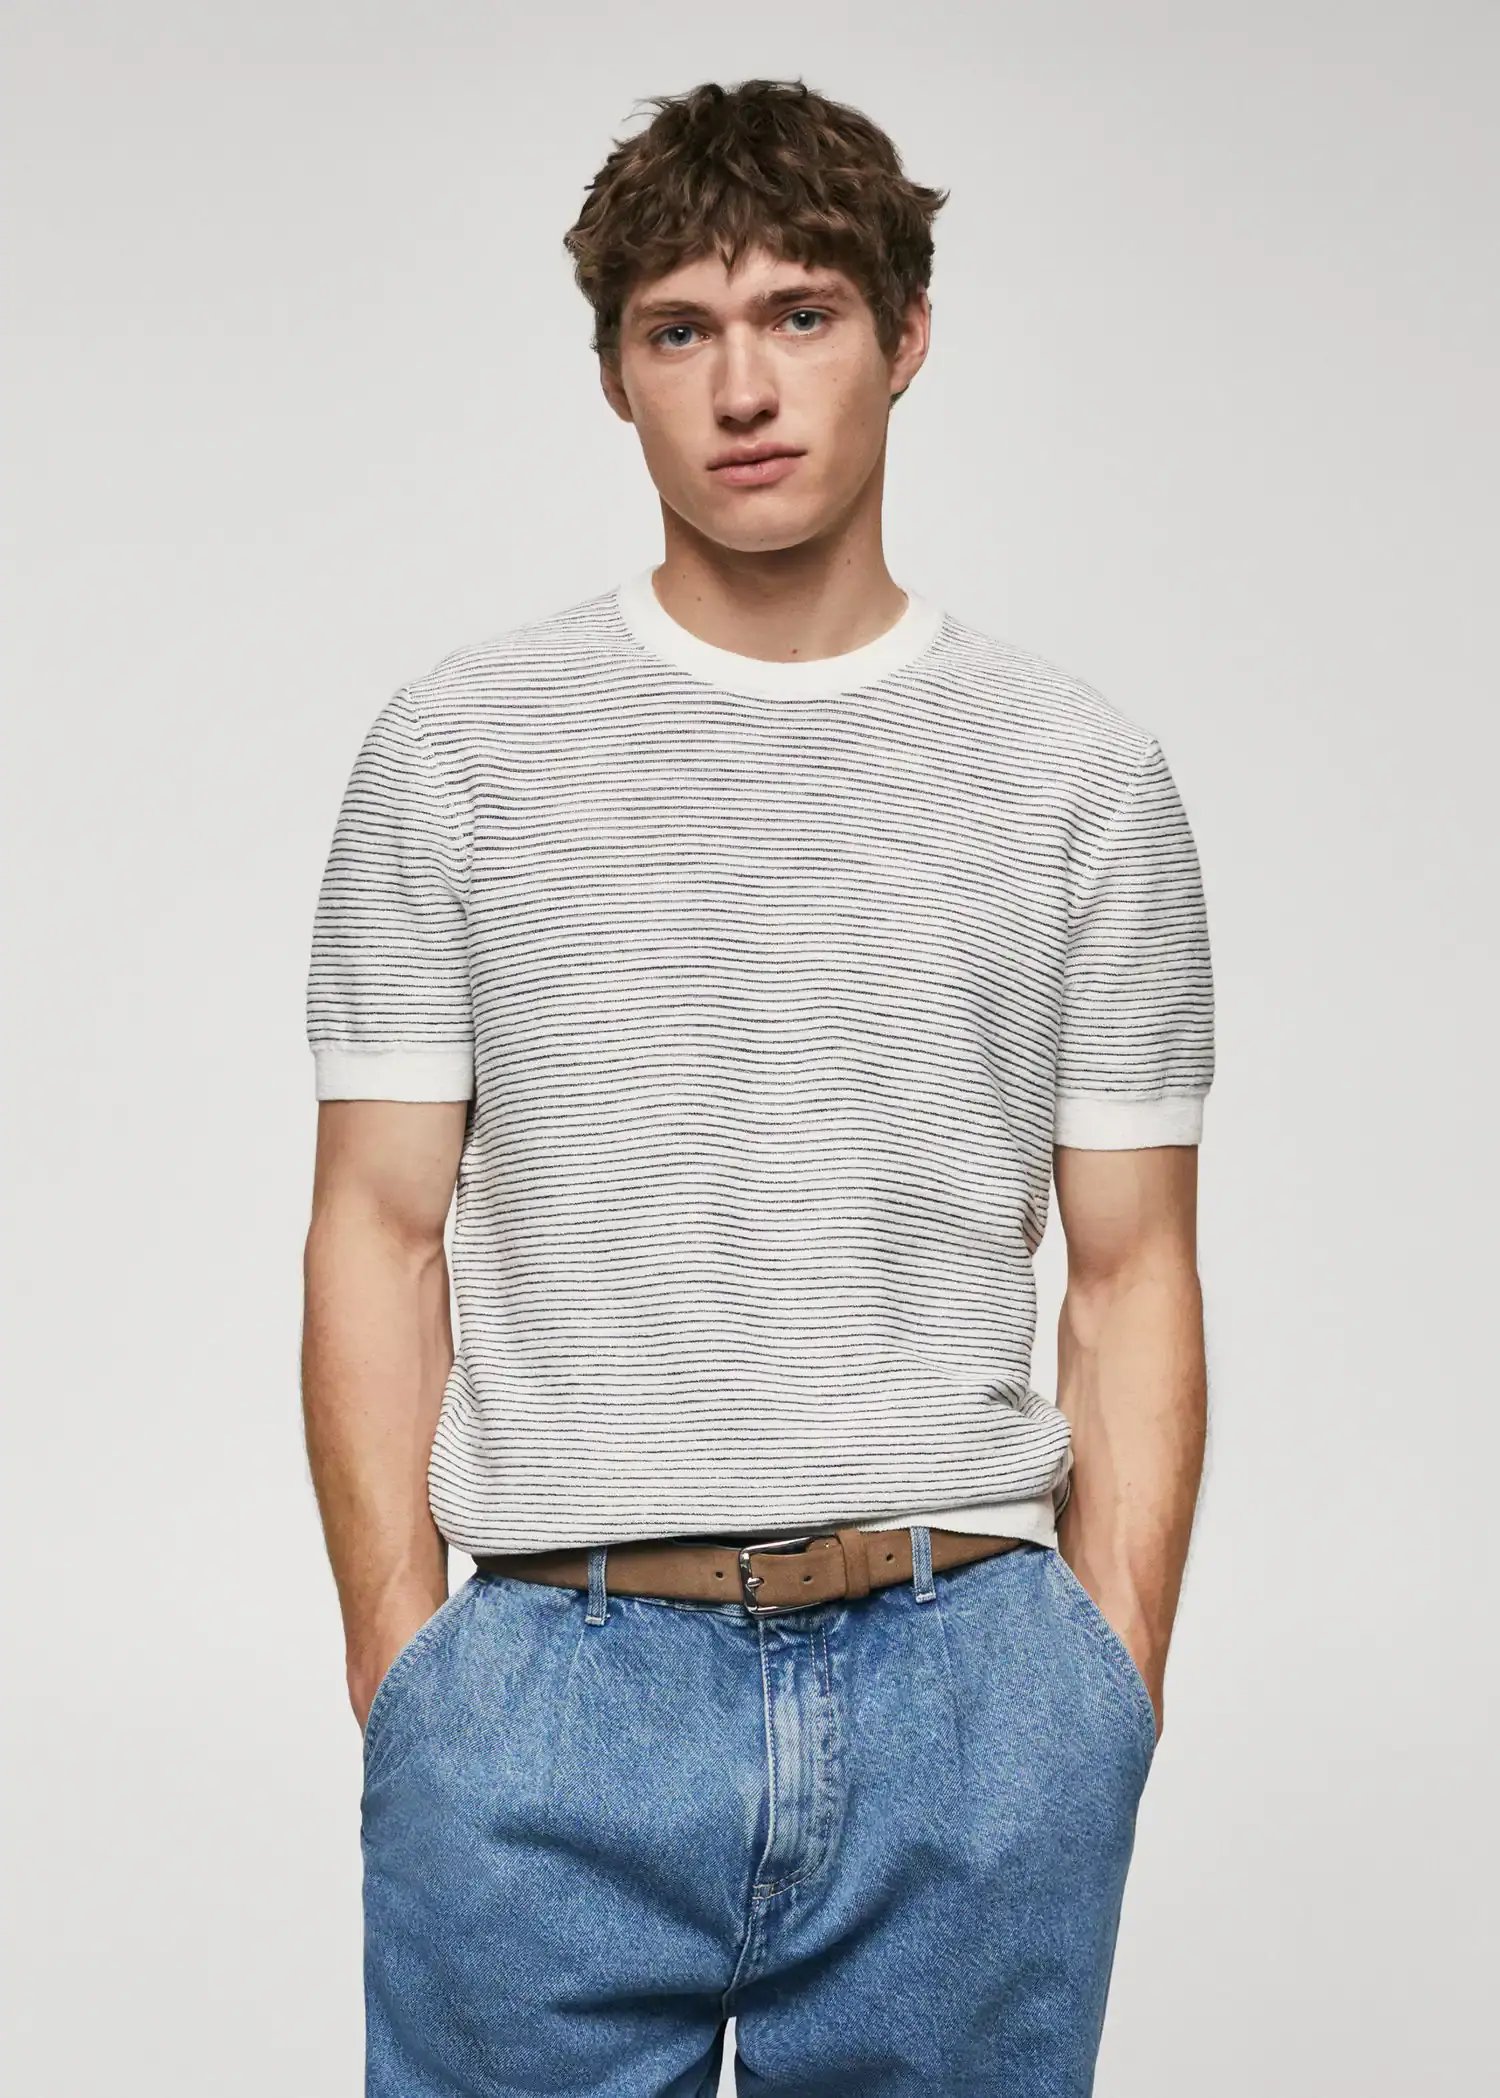 Mango Textured striped T-shirt. a young man wearing jeans and a t-shirt. 